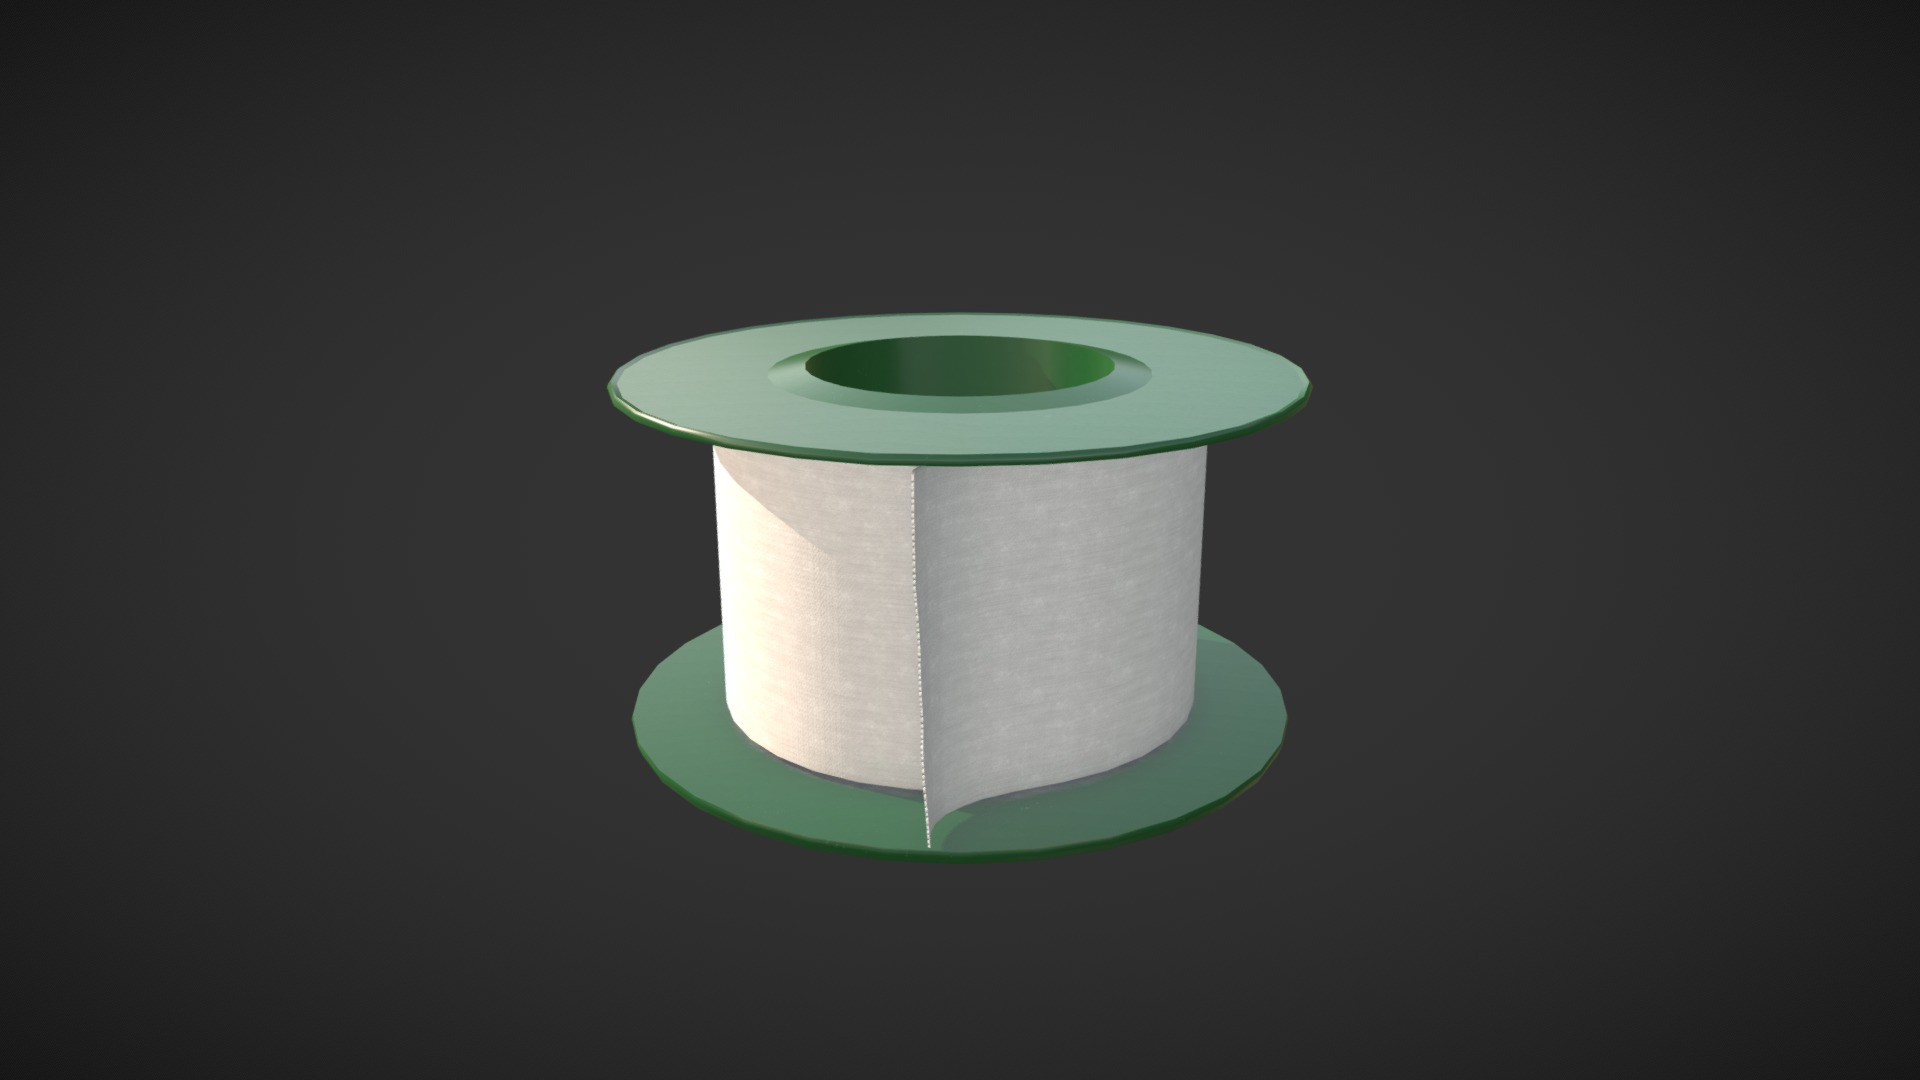 3D model Surgical tape - This is a 3D model of the Surgical tape. The 3D model is about a green and white bowl.